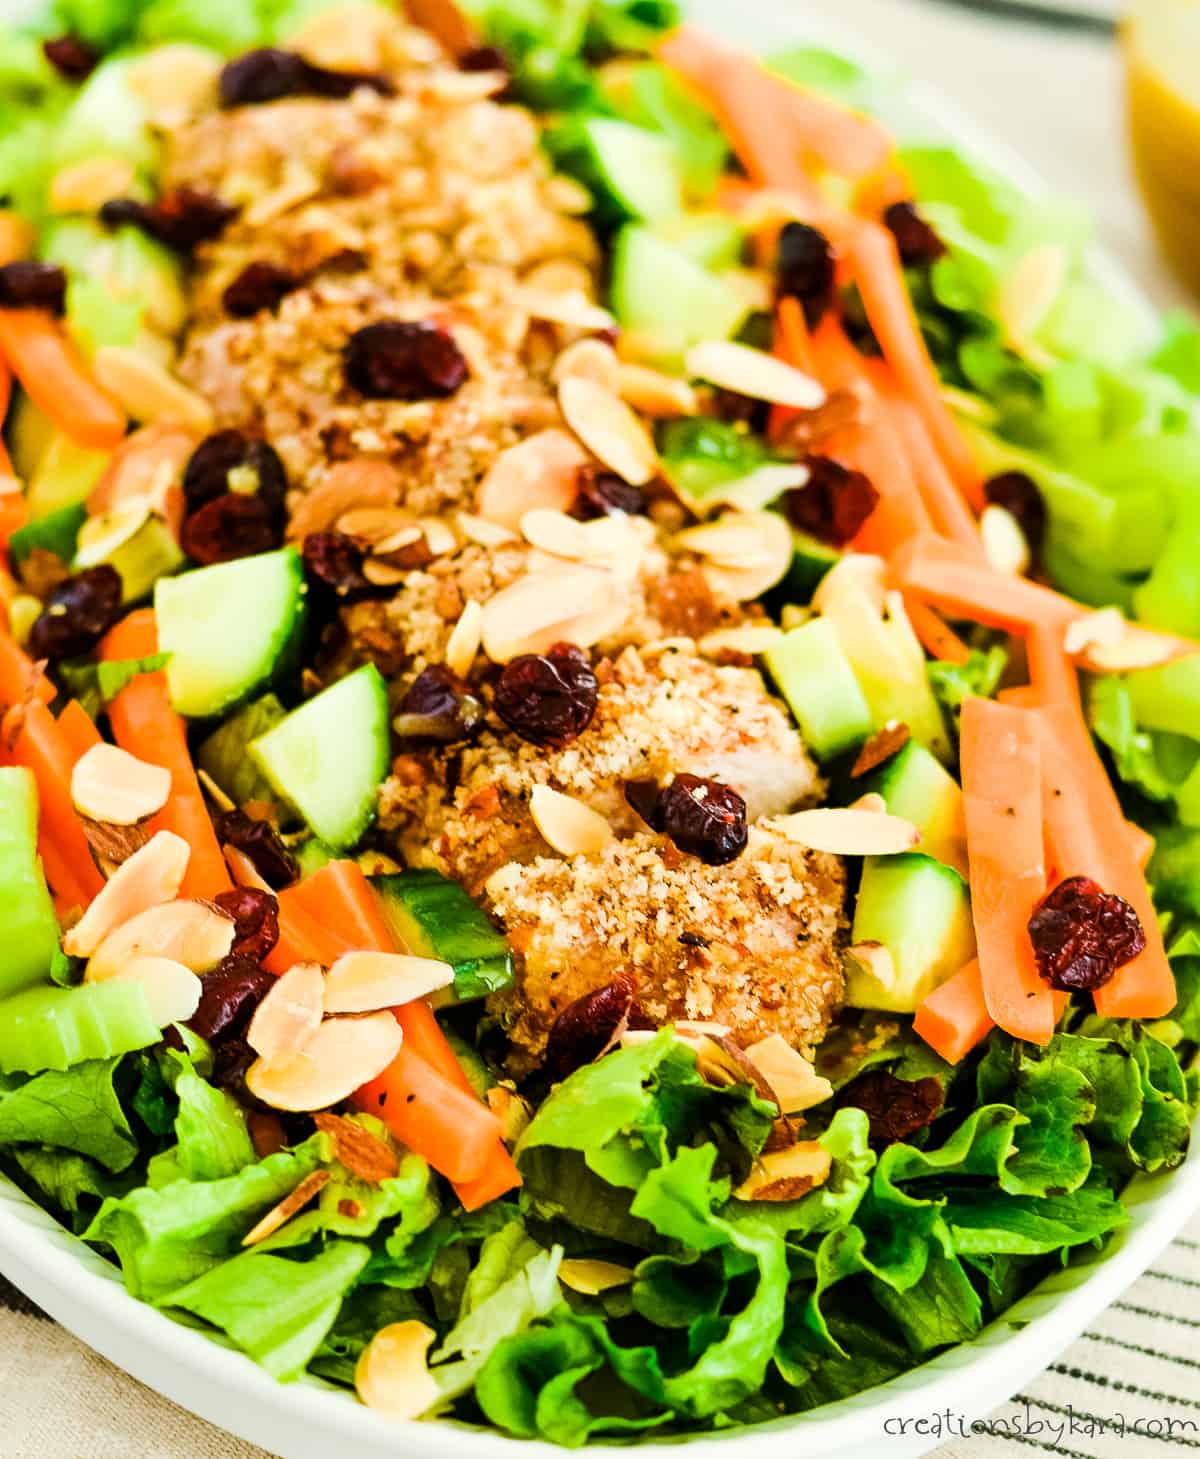 green salad topped with chicken, craisins, and almonds